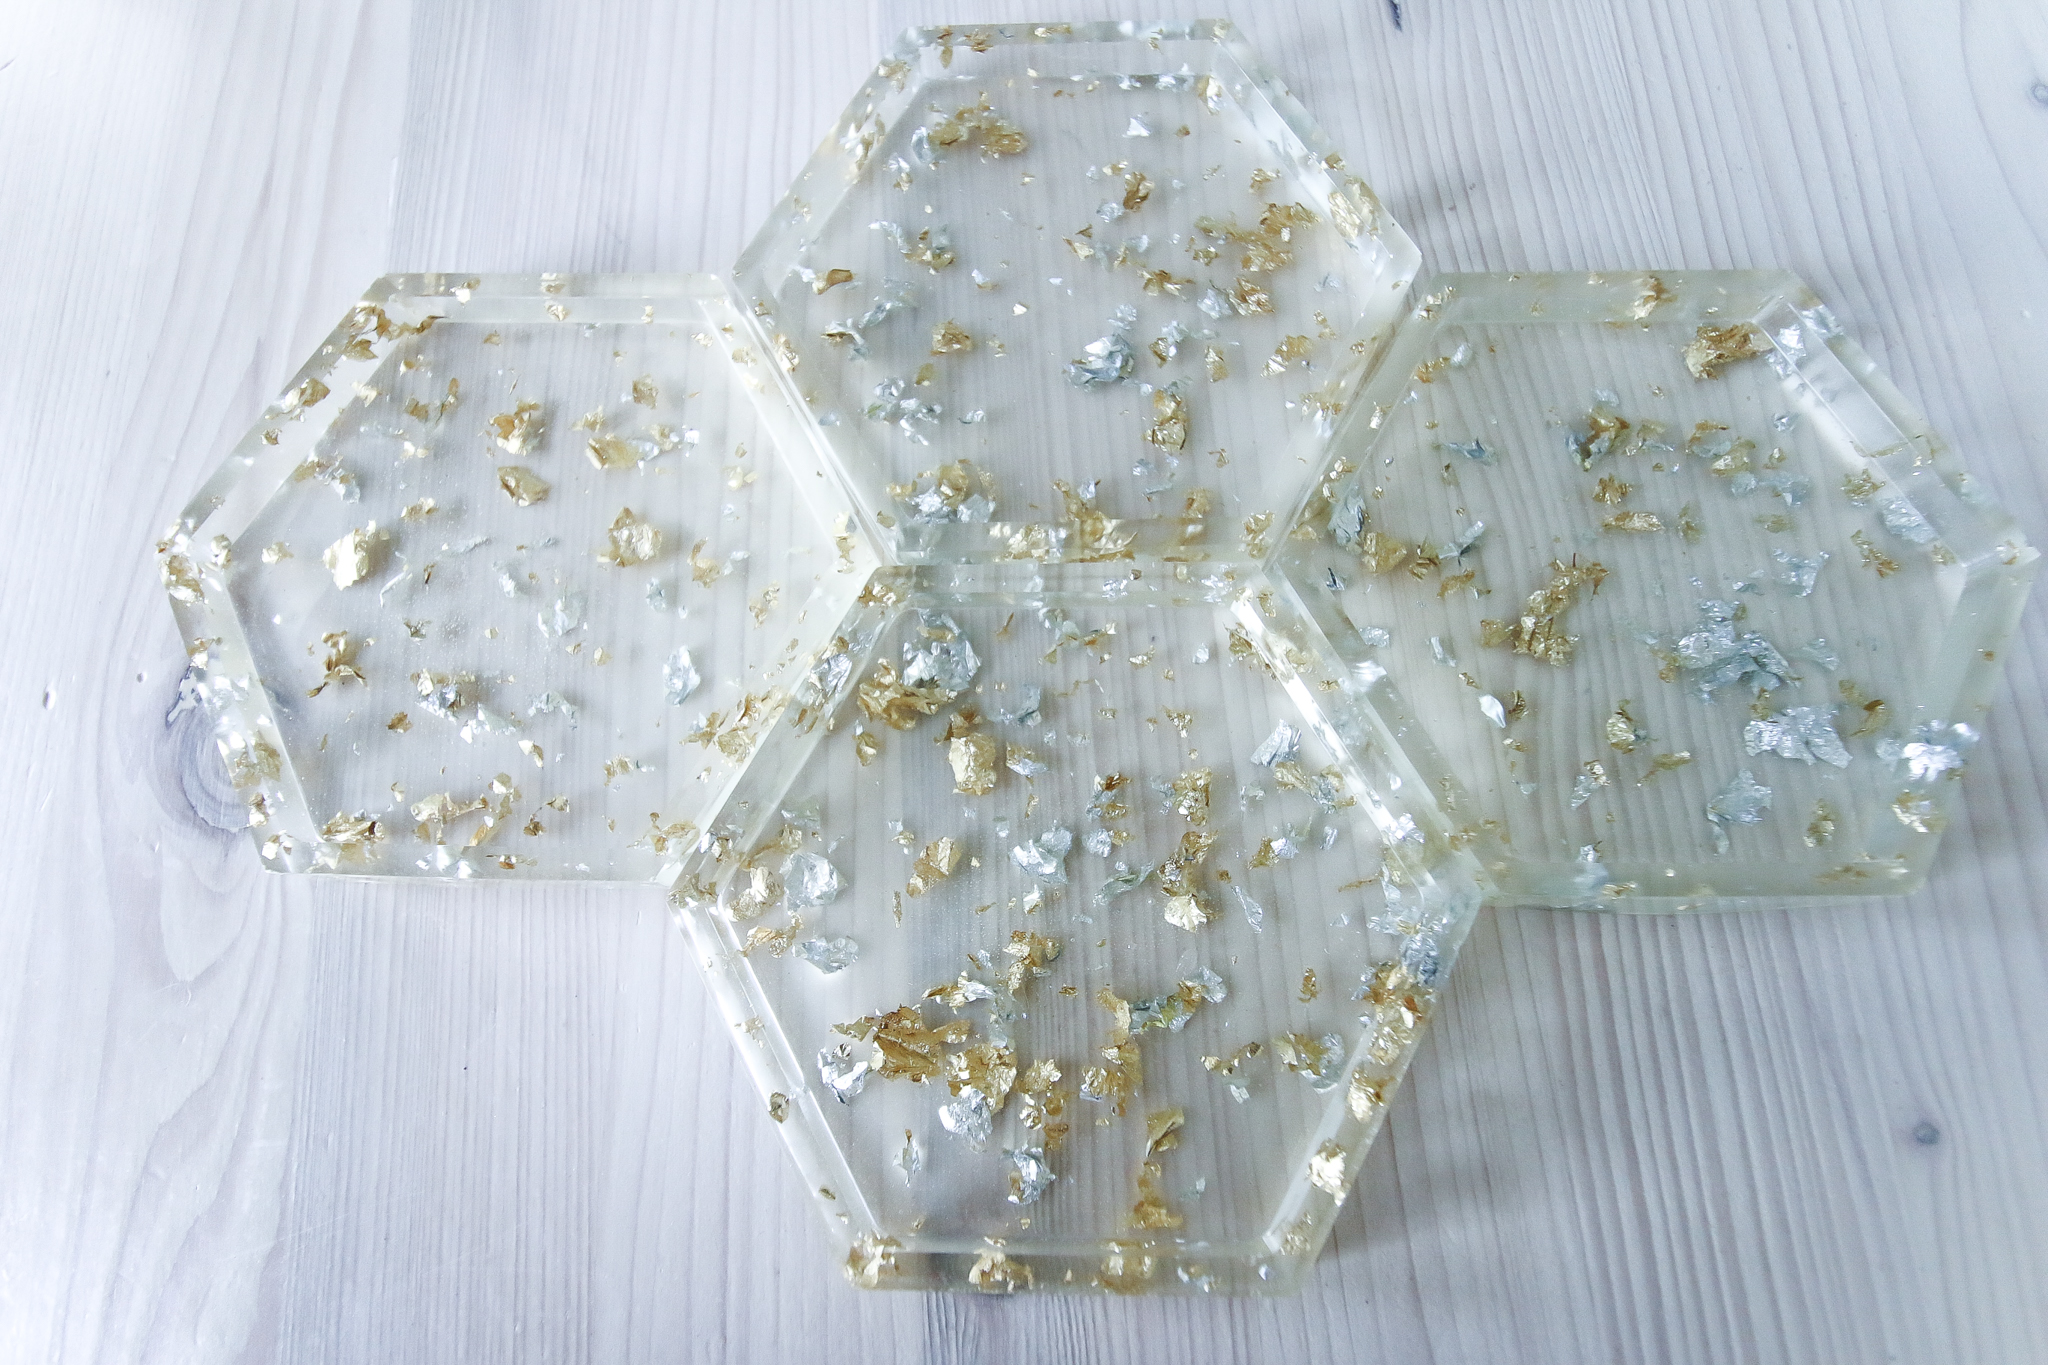 How To Create A Basic Epoxy Resin Coaster